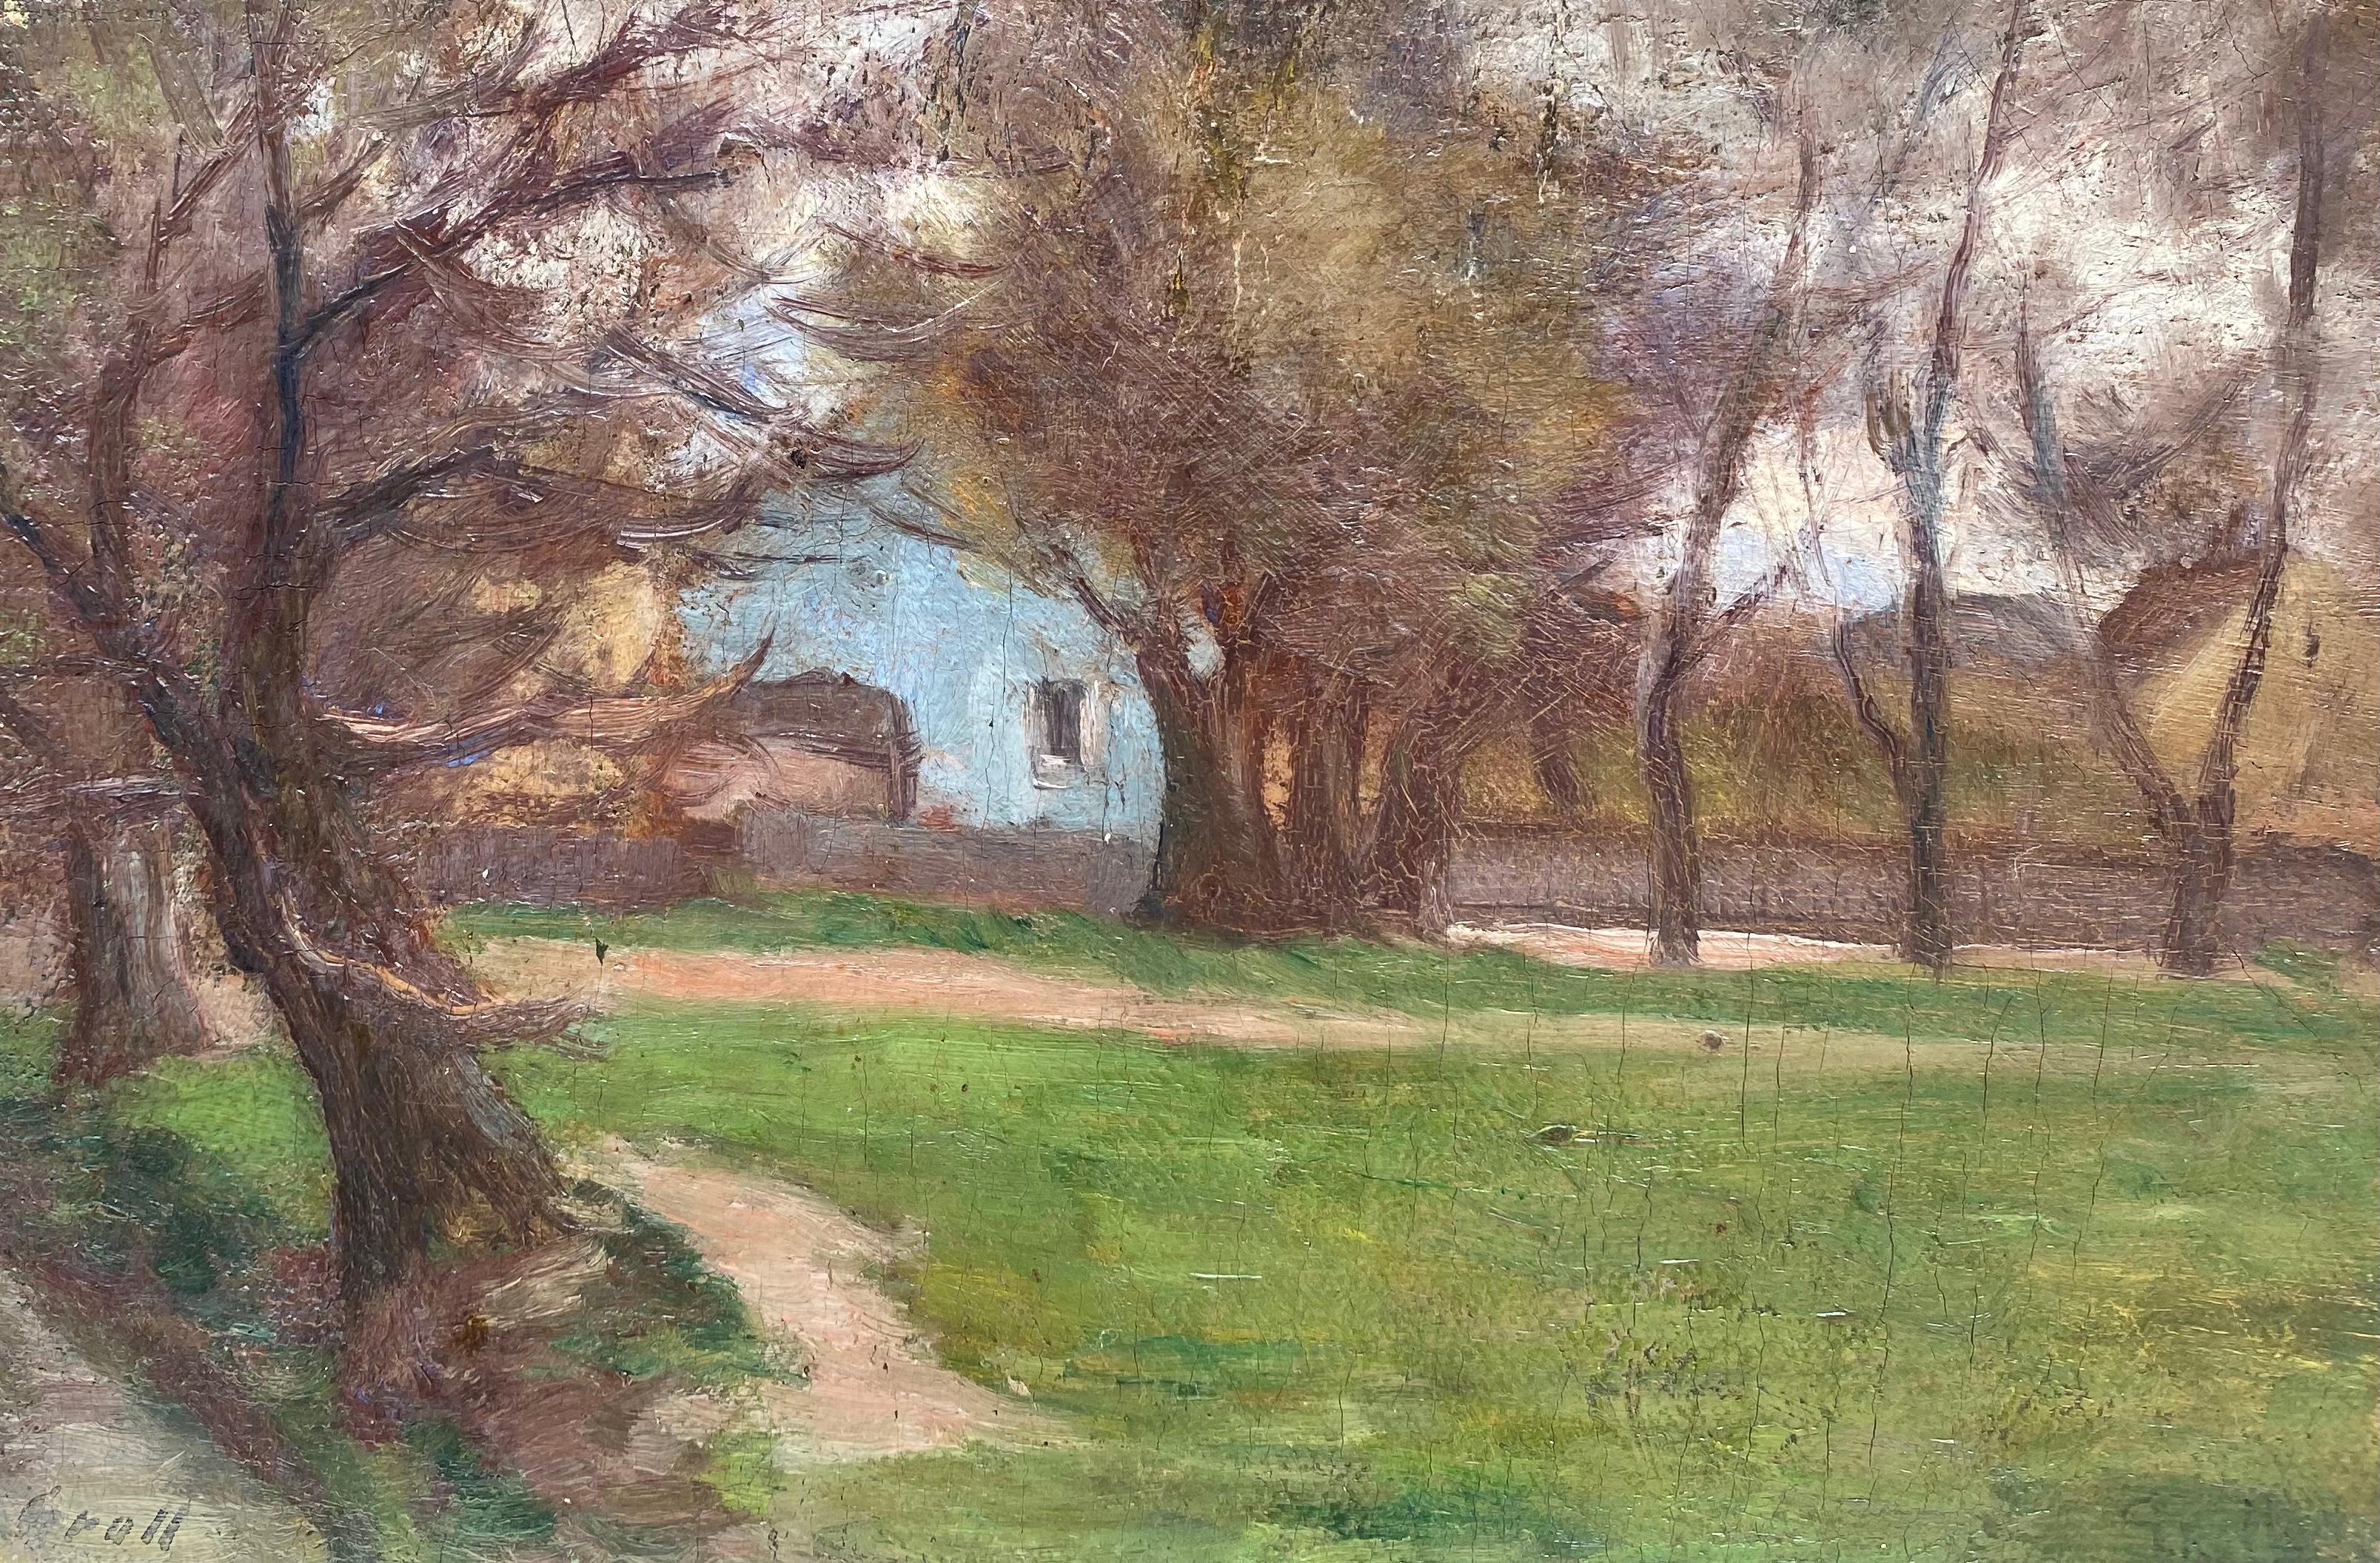 Albert Lorey Groll Landscape Painting - “A Lovely Day”